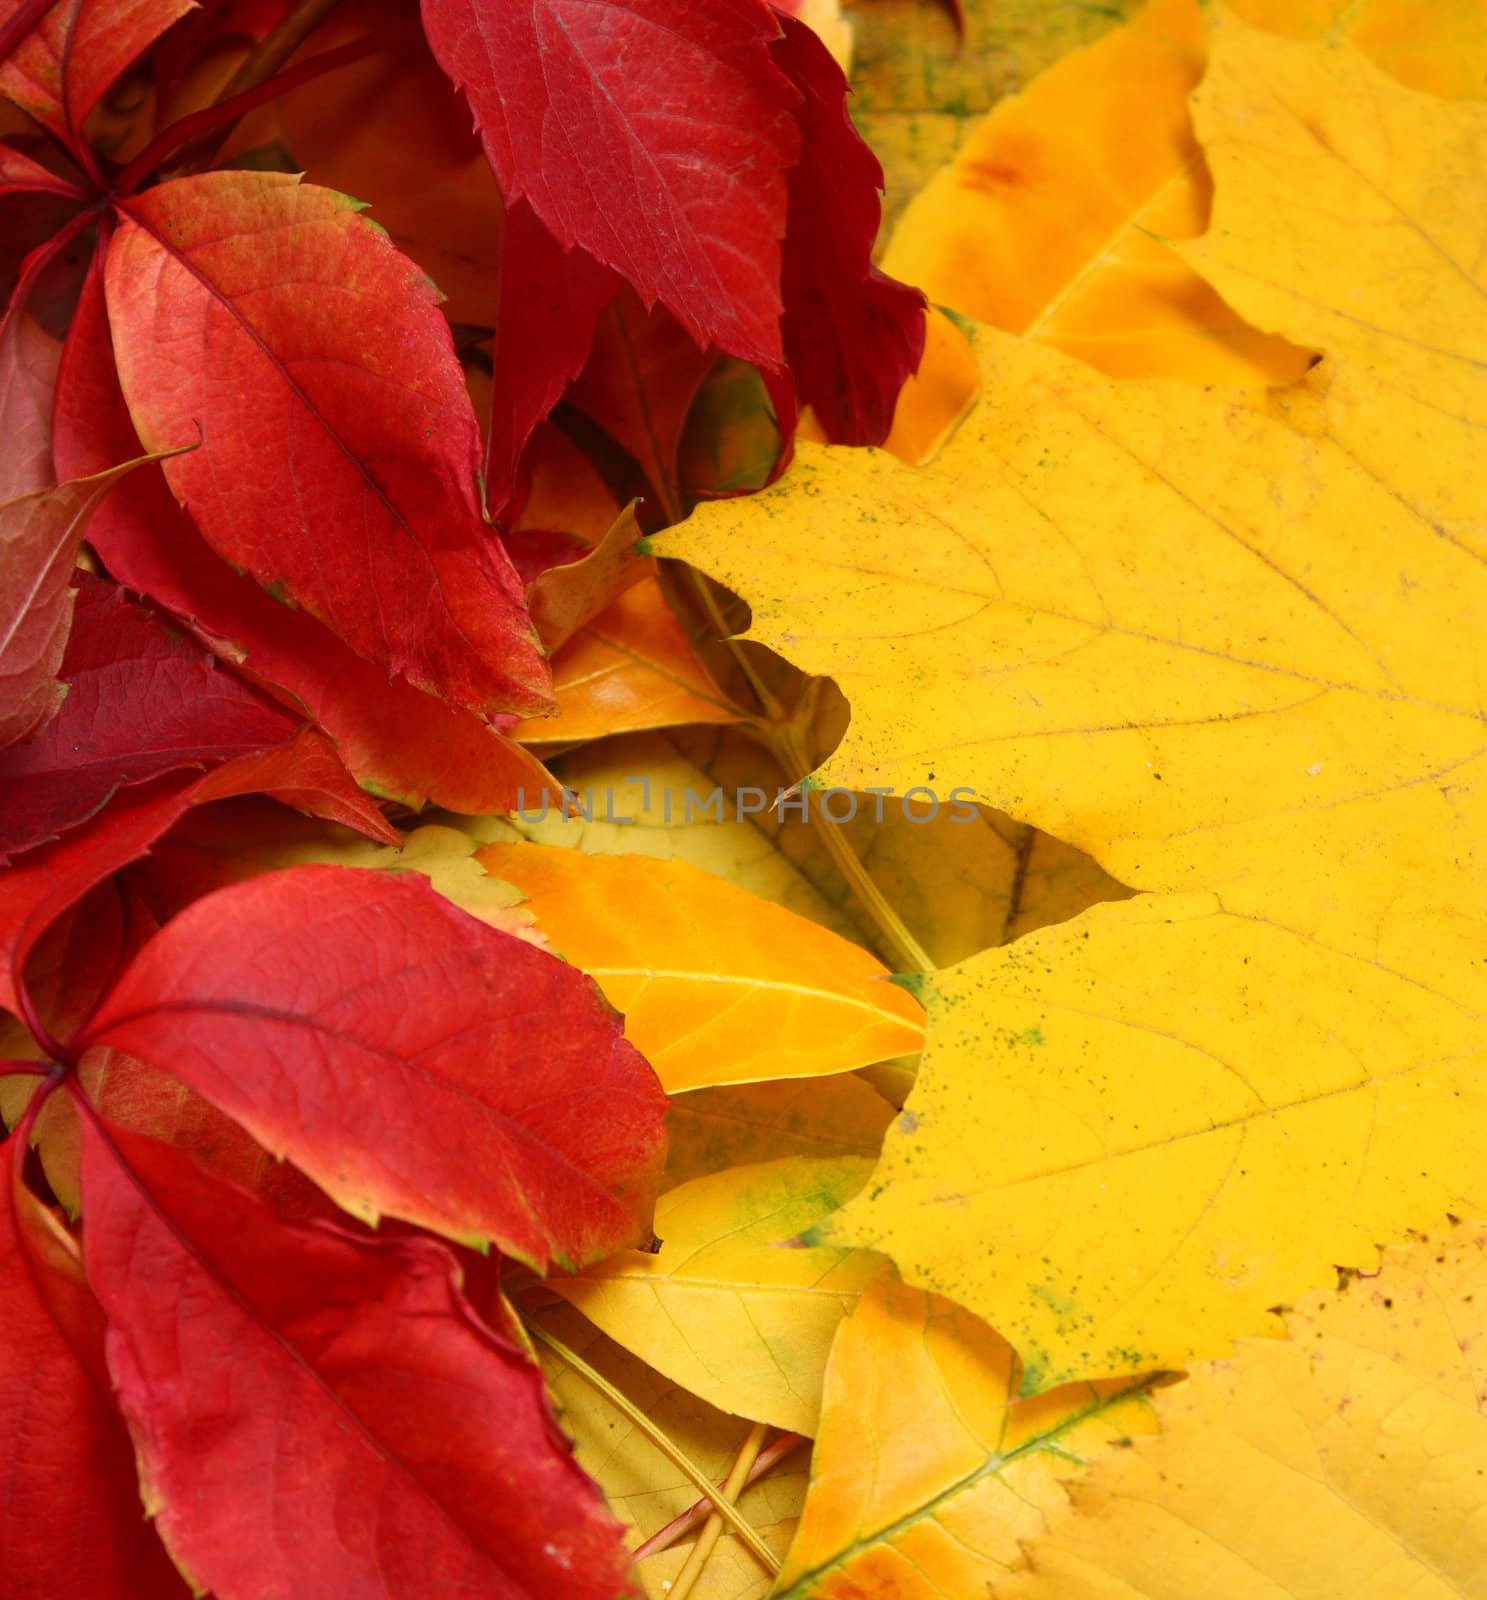 Red and yellow autumn leaves by eshatilo